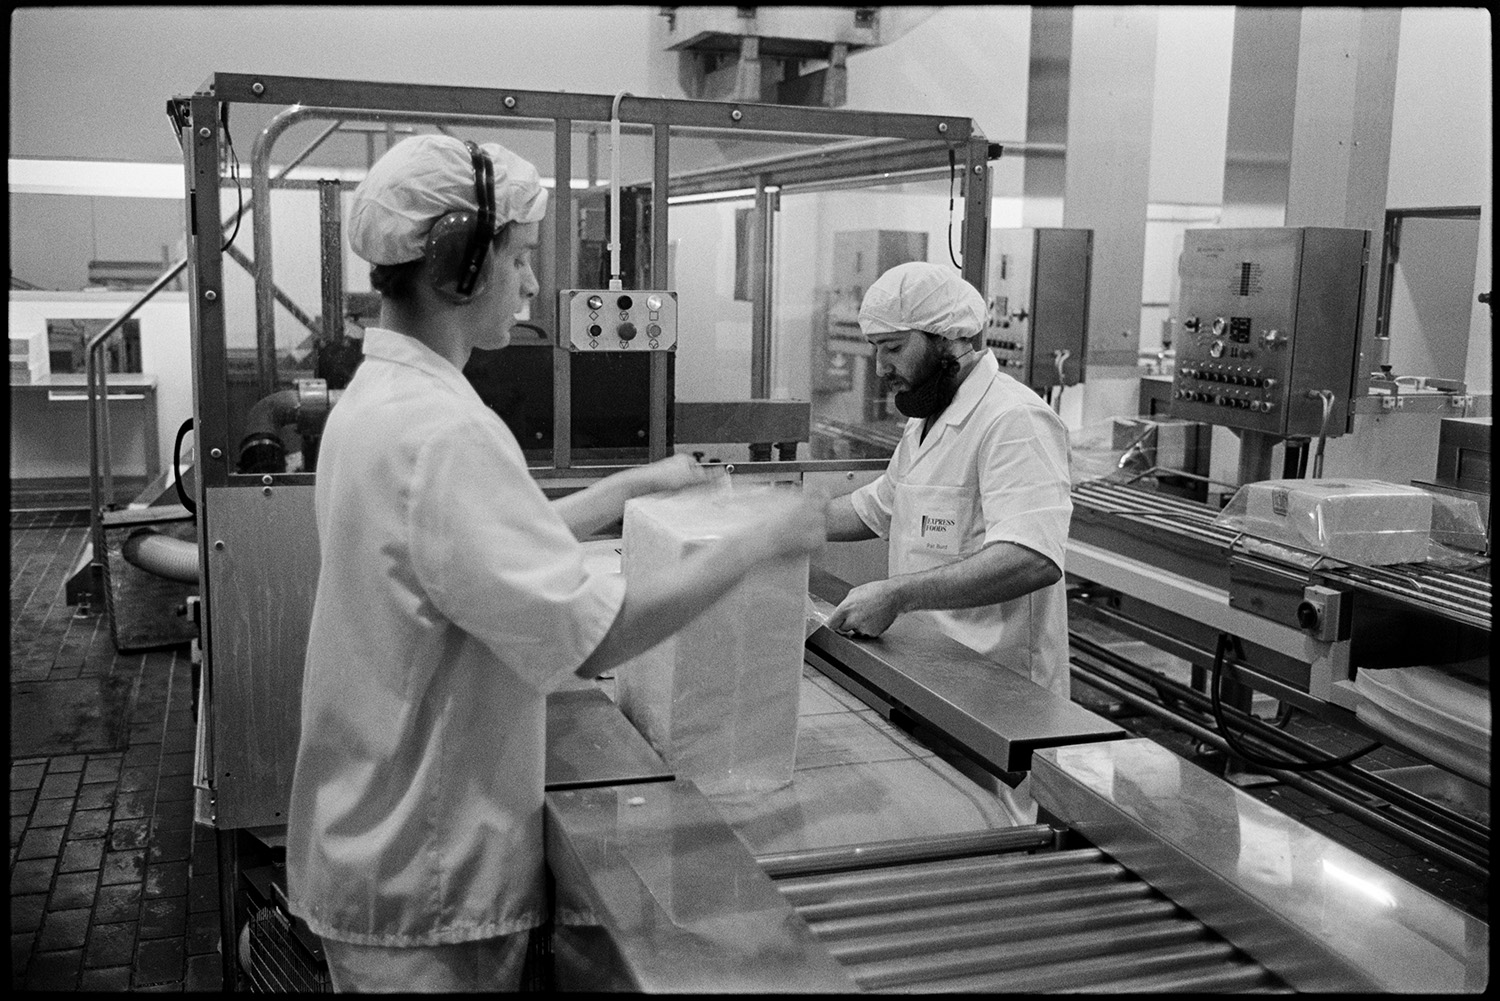 Interior of cheese factory men testing cheese and packing. 
[Two people packing cheese at the Dairy Crest North Tawton Cheese Factory. The person in the foreground is wearing ear defenders.]